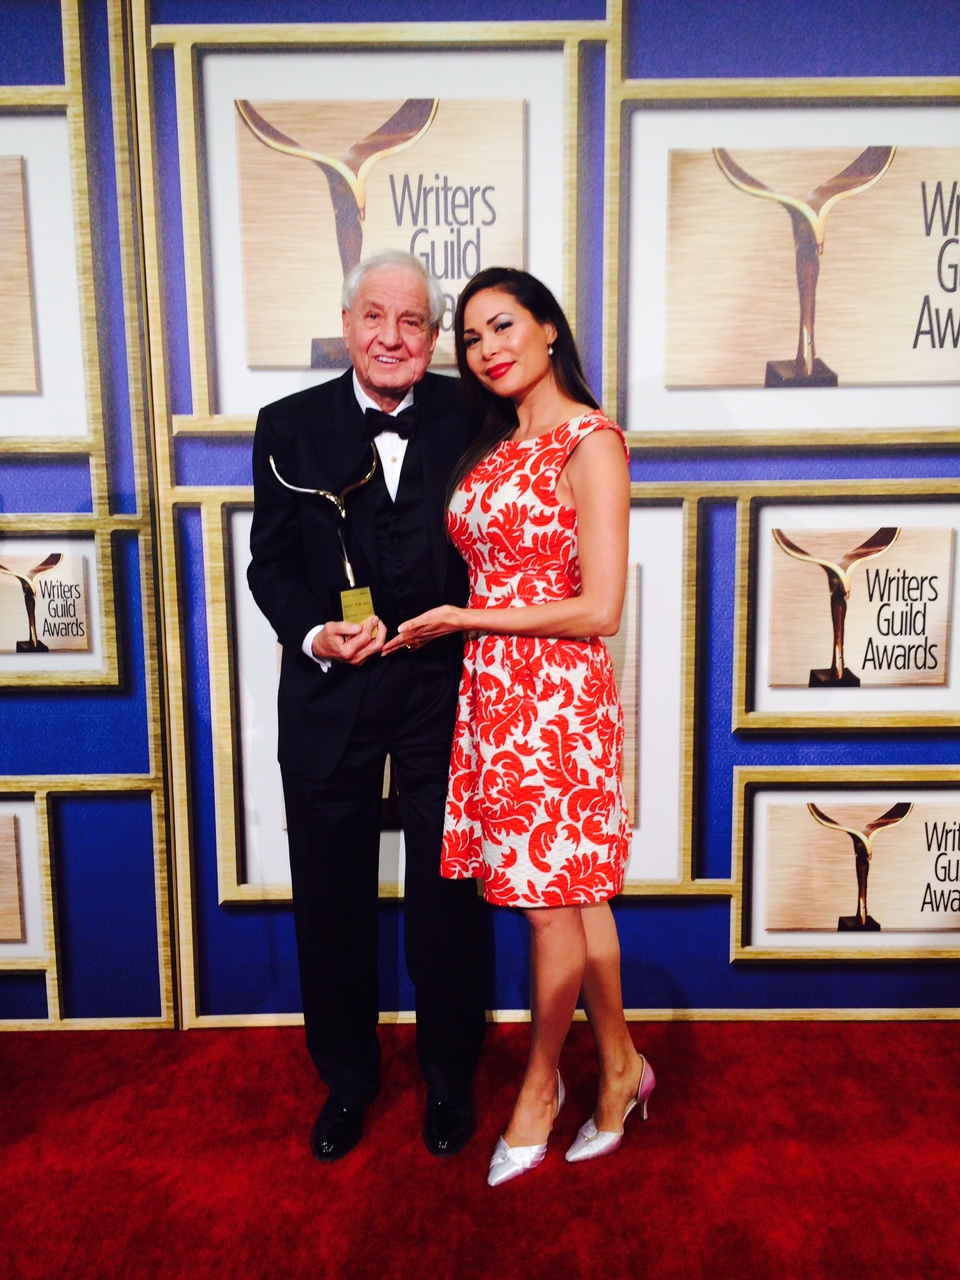 Legend Garry Marshall and Actress Radhaa Nilia at the Writers Guild Awards West 2014.